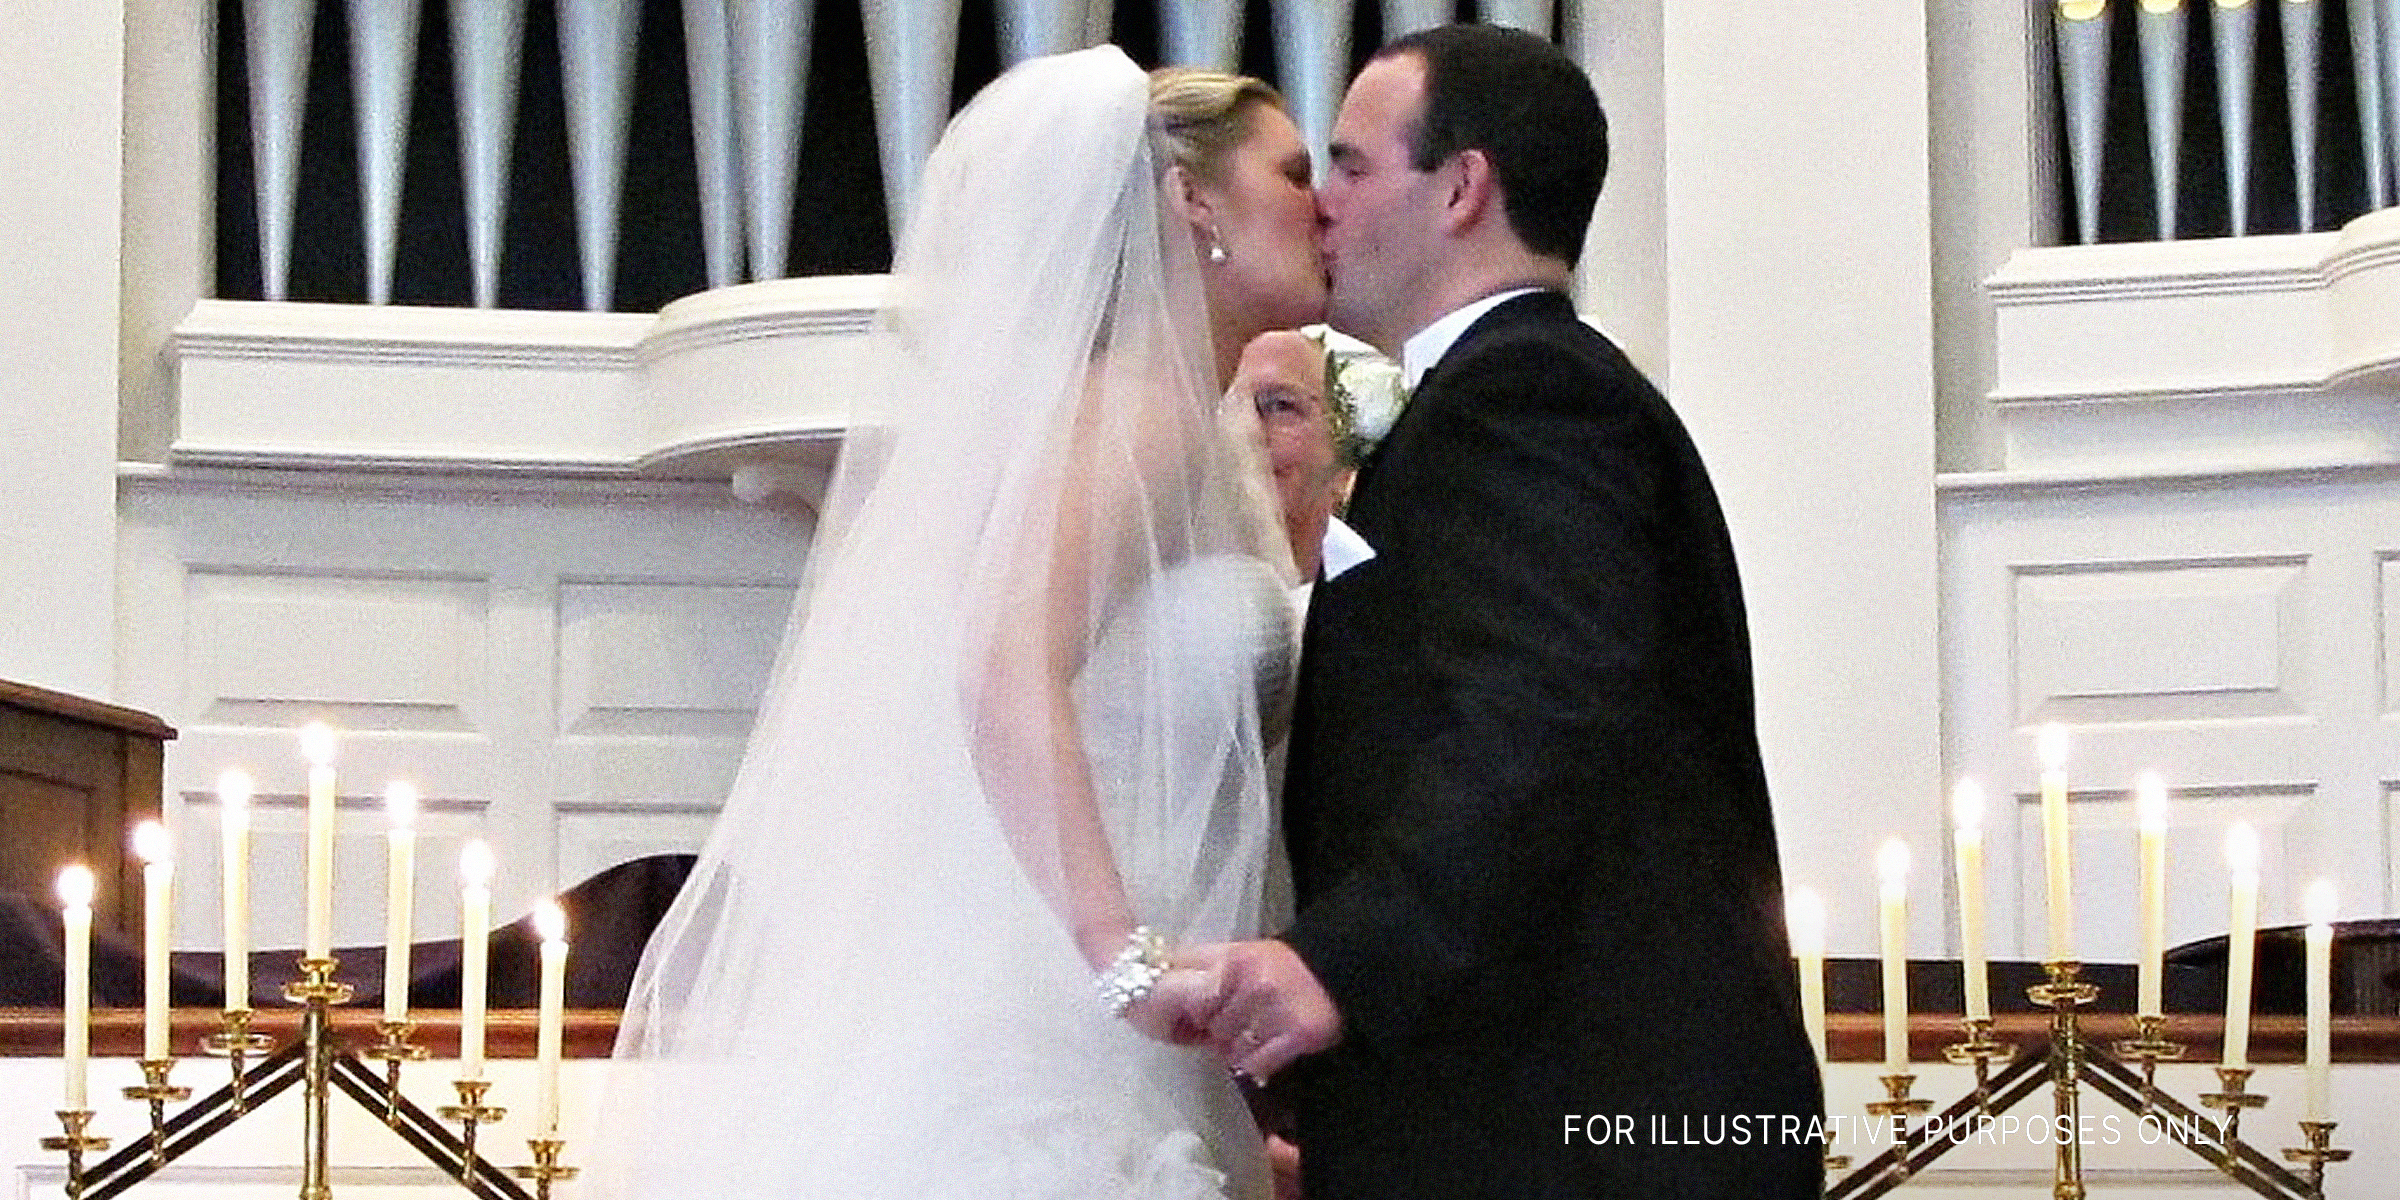 Couple's first kiss at the altar | Source: Flickr